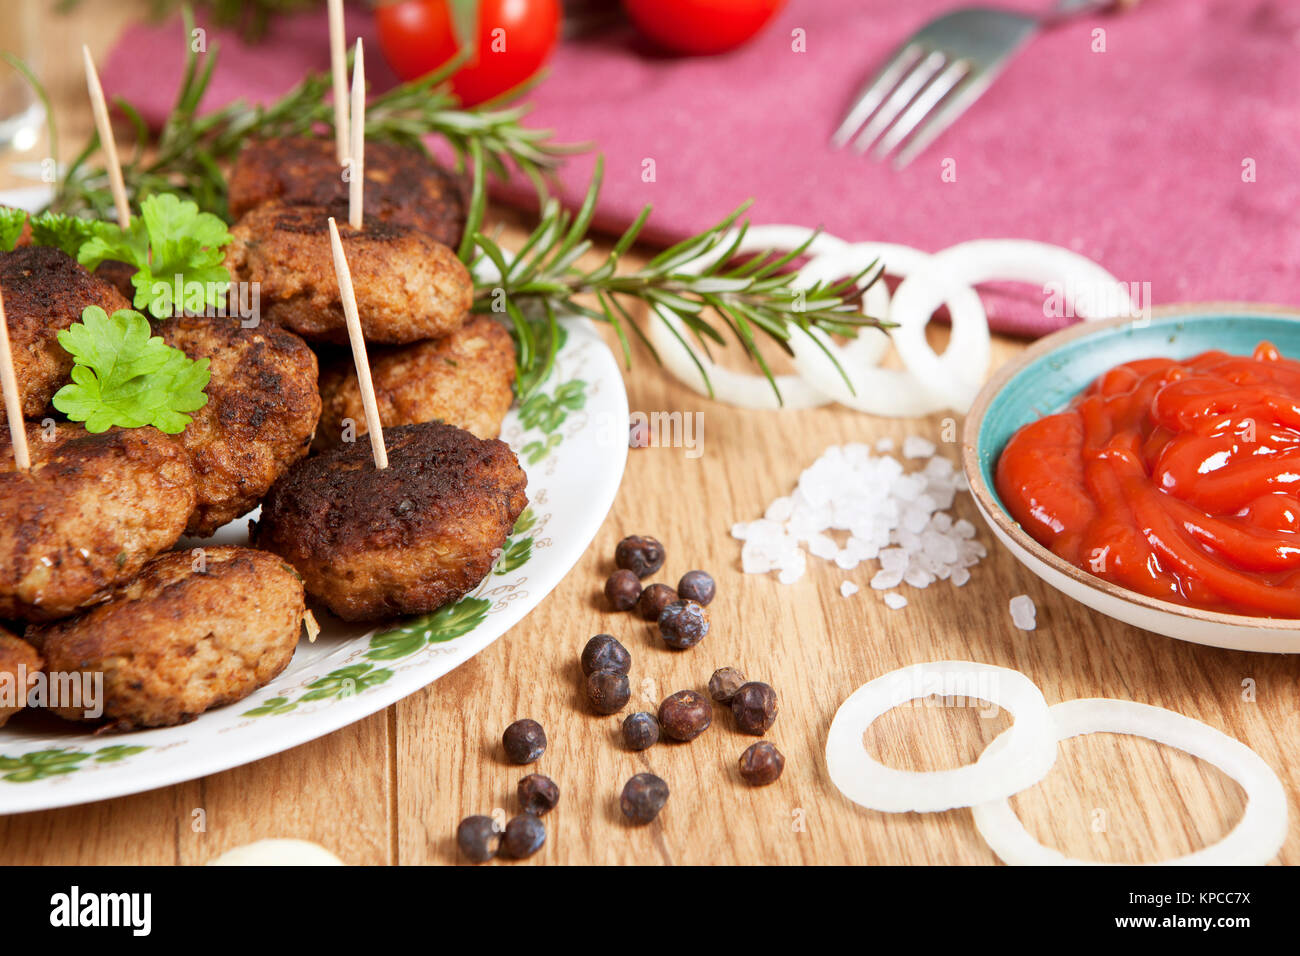 meatballs with ketchup Stock Photo